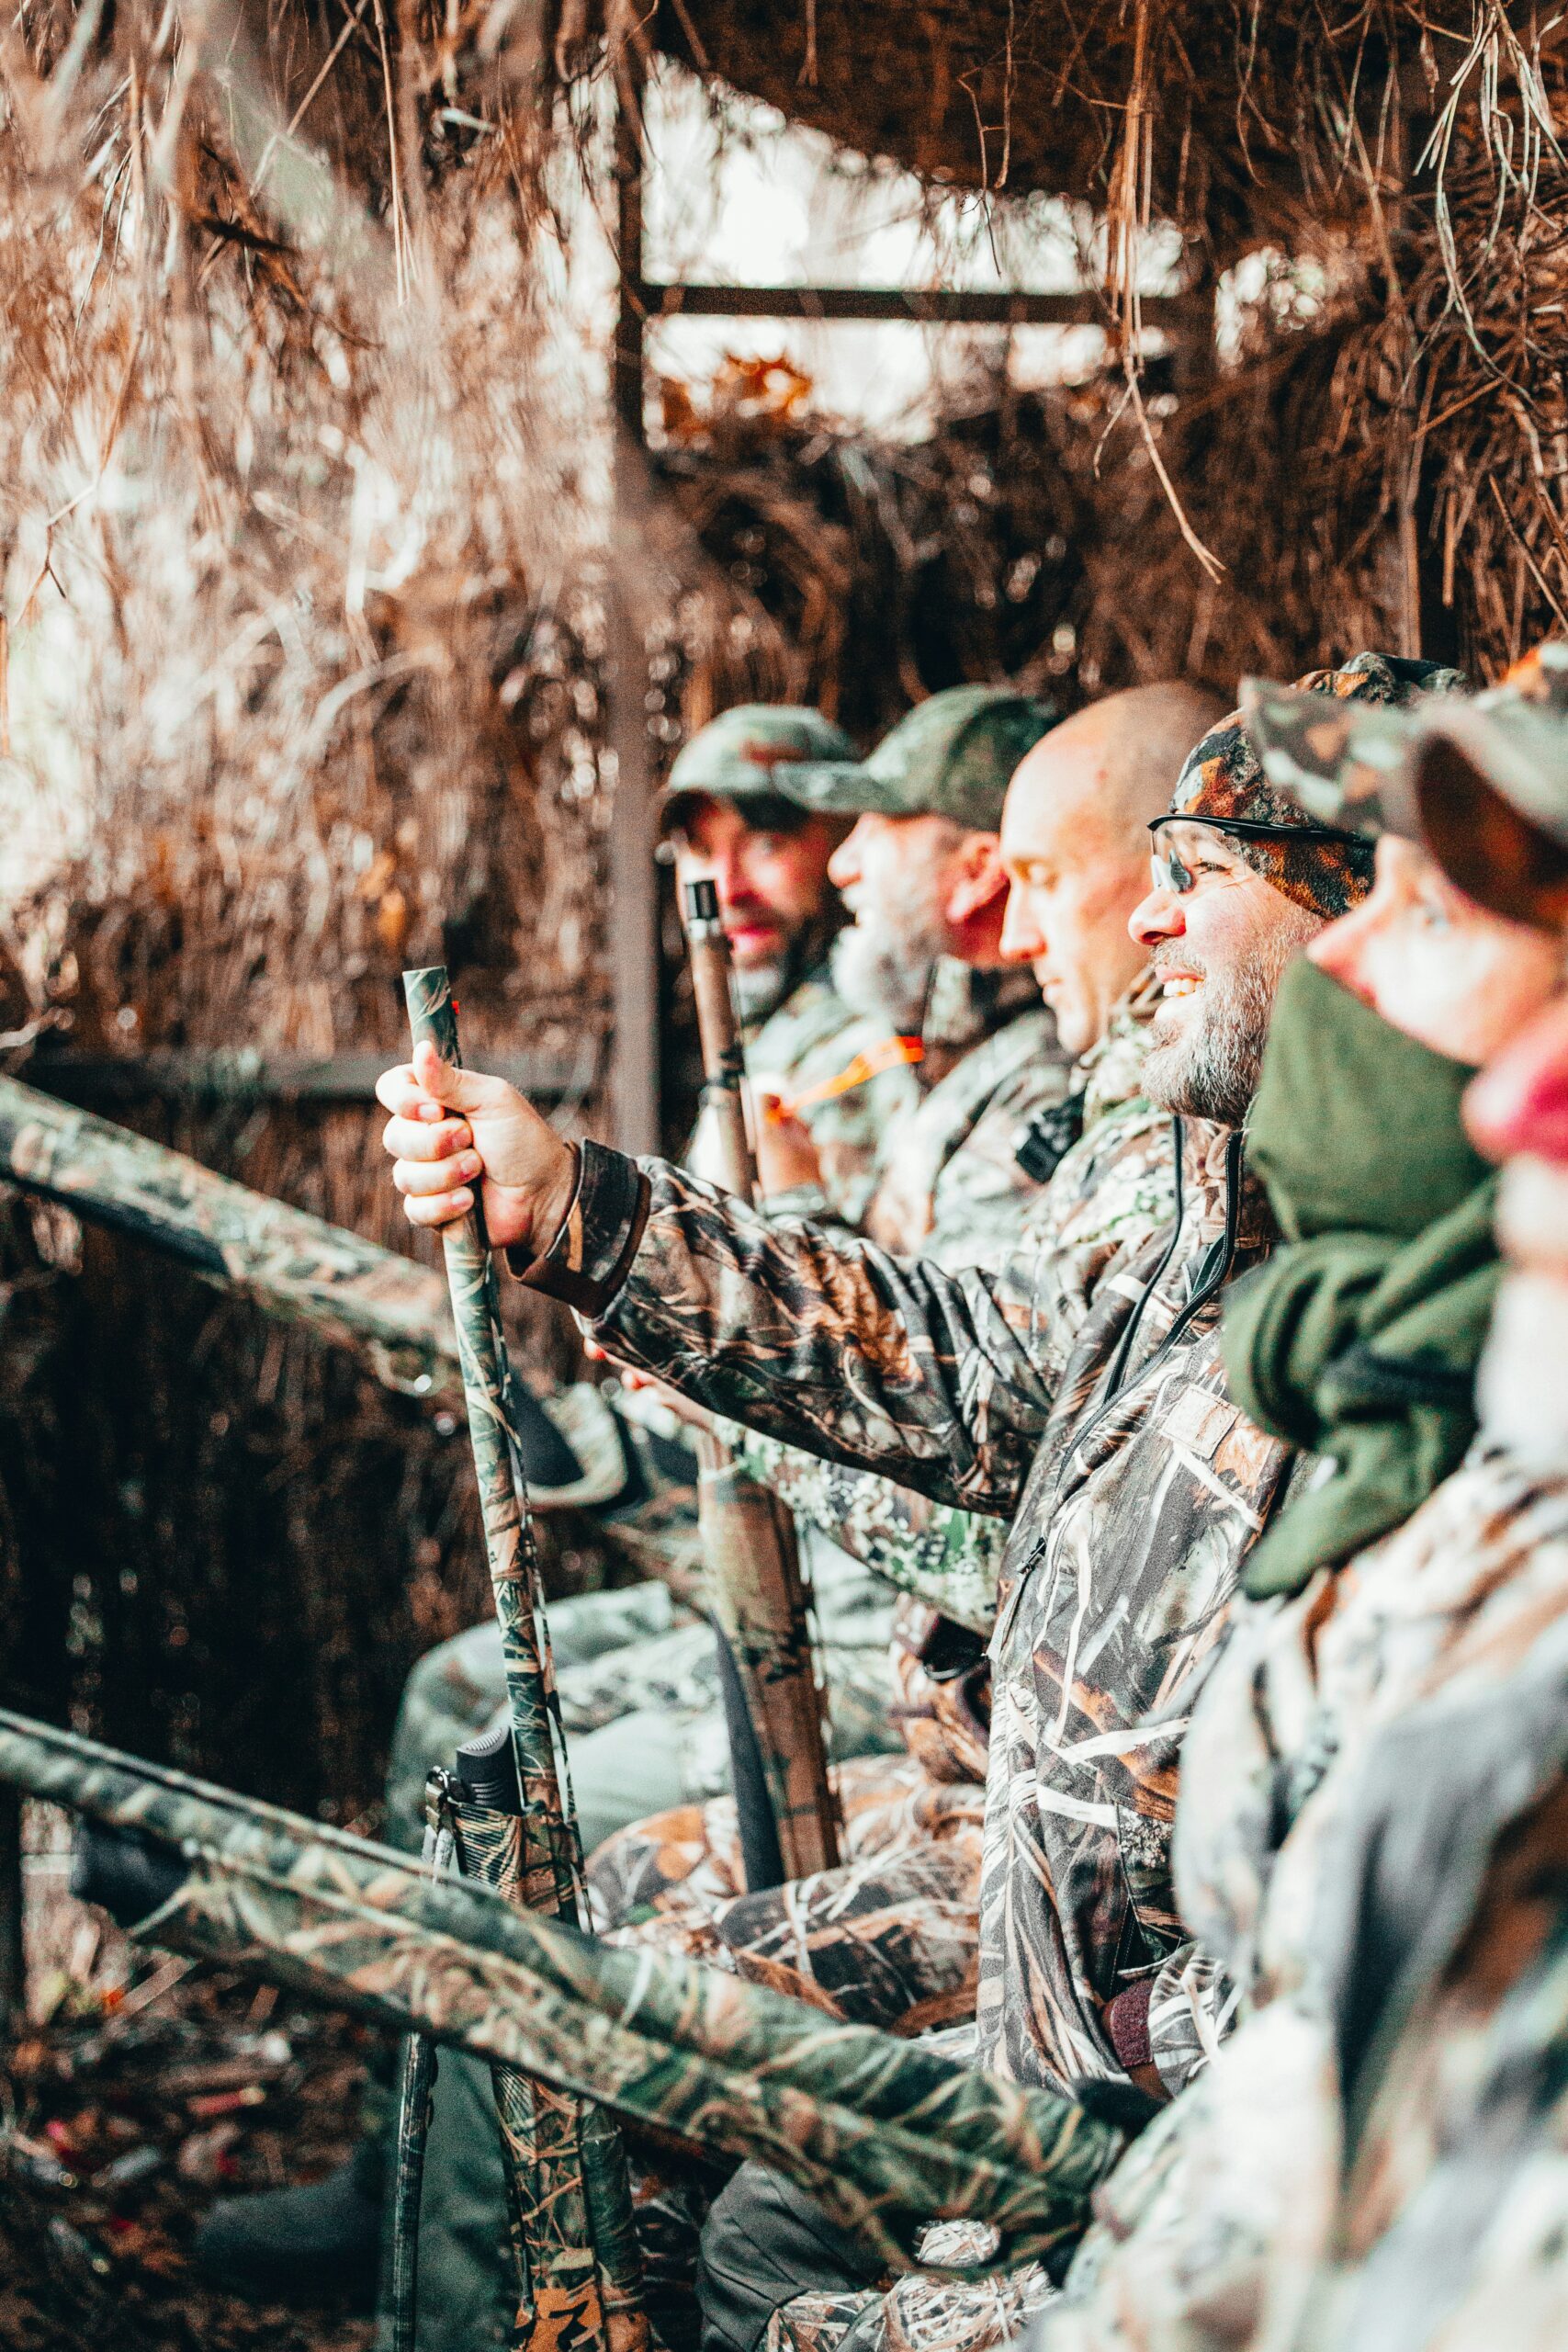 How Does The Size And Weight Of Optics Impact Hunting?